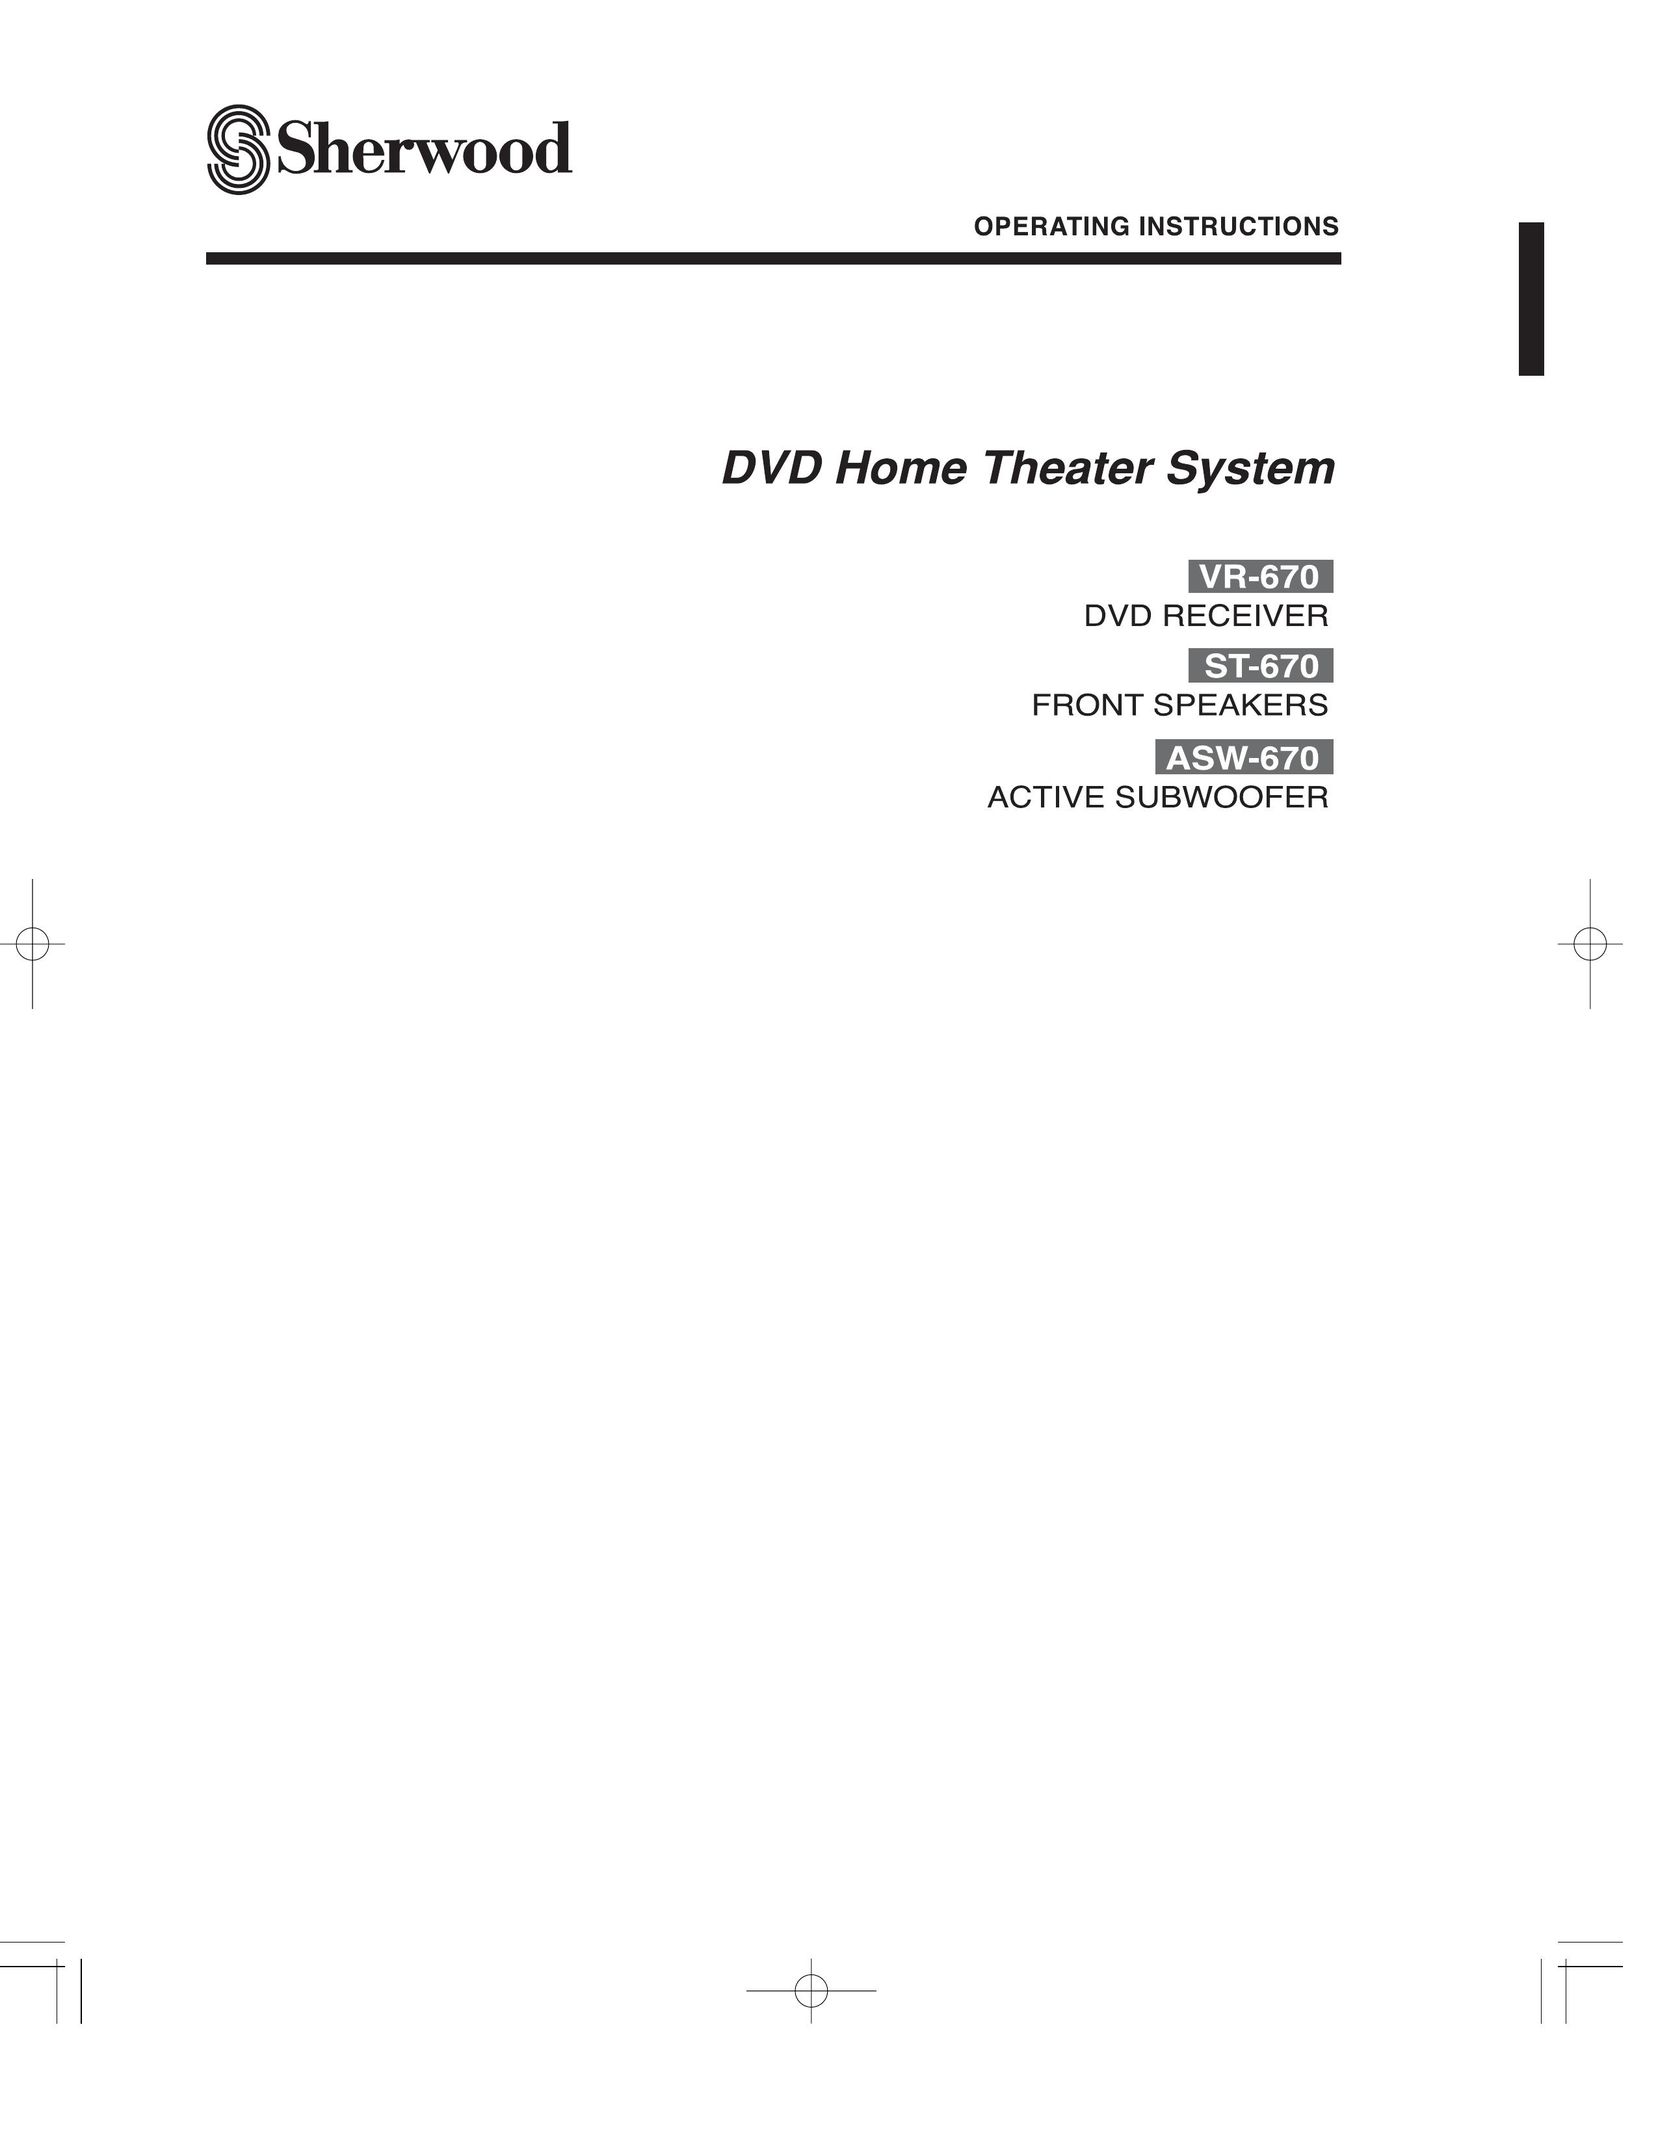 Sherwood VR-670 Home Theater System User Manual